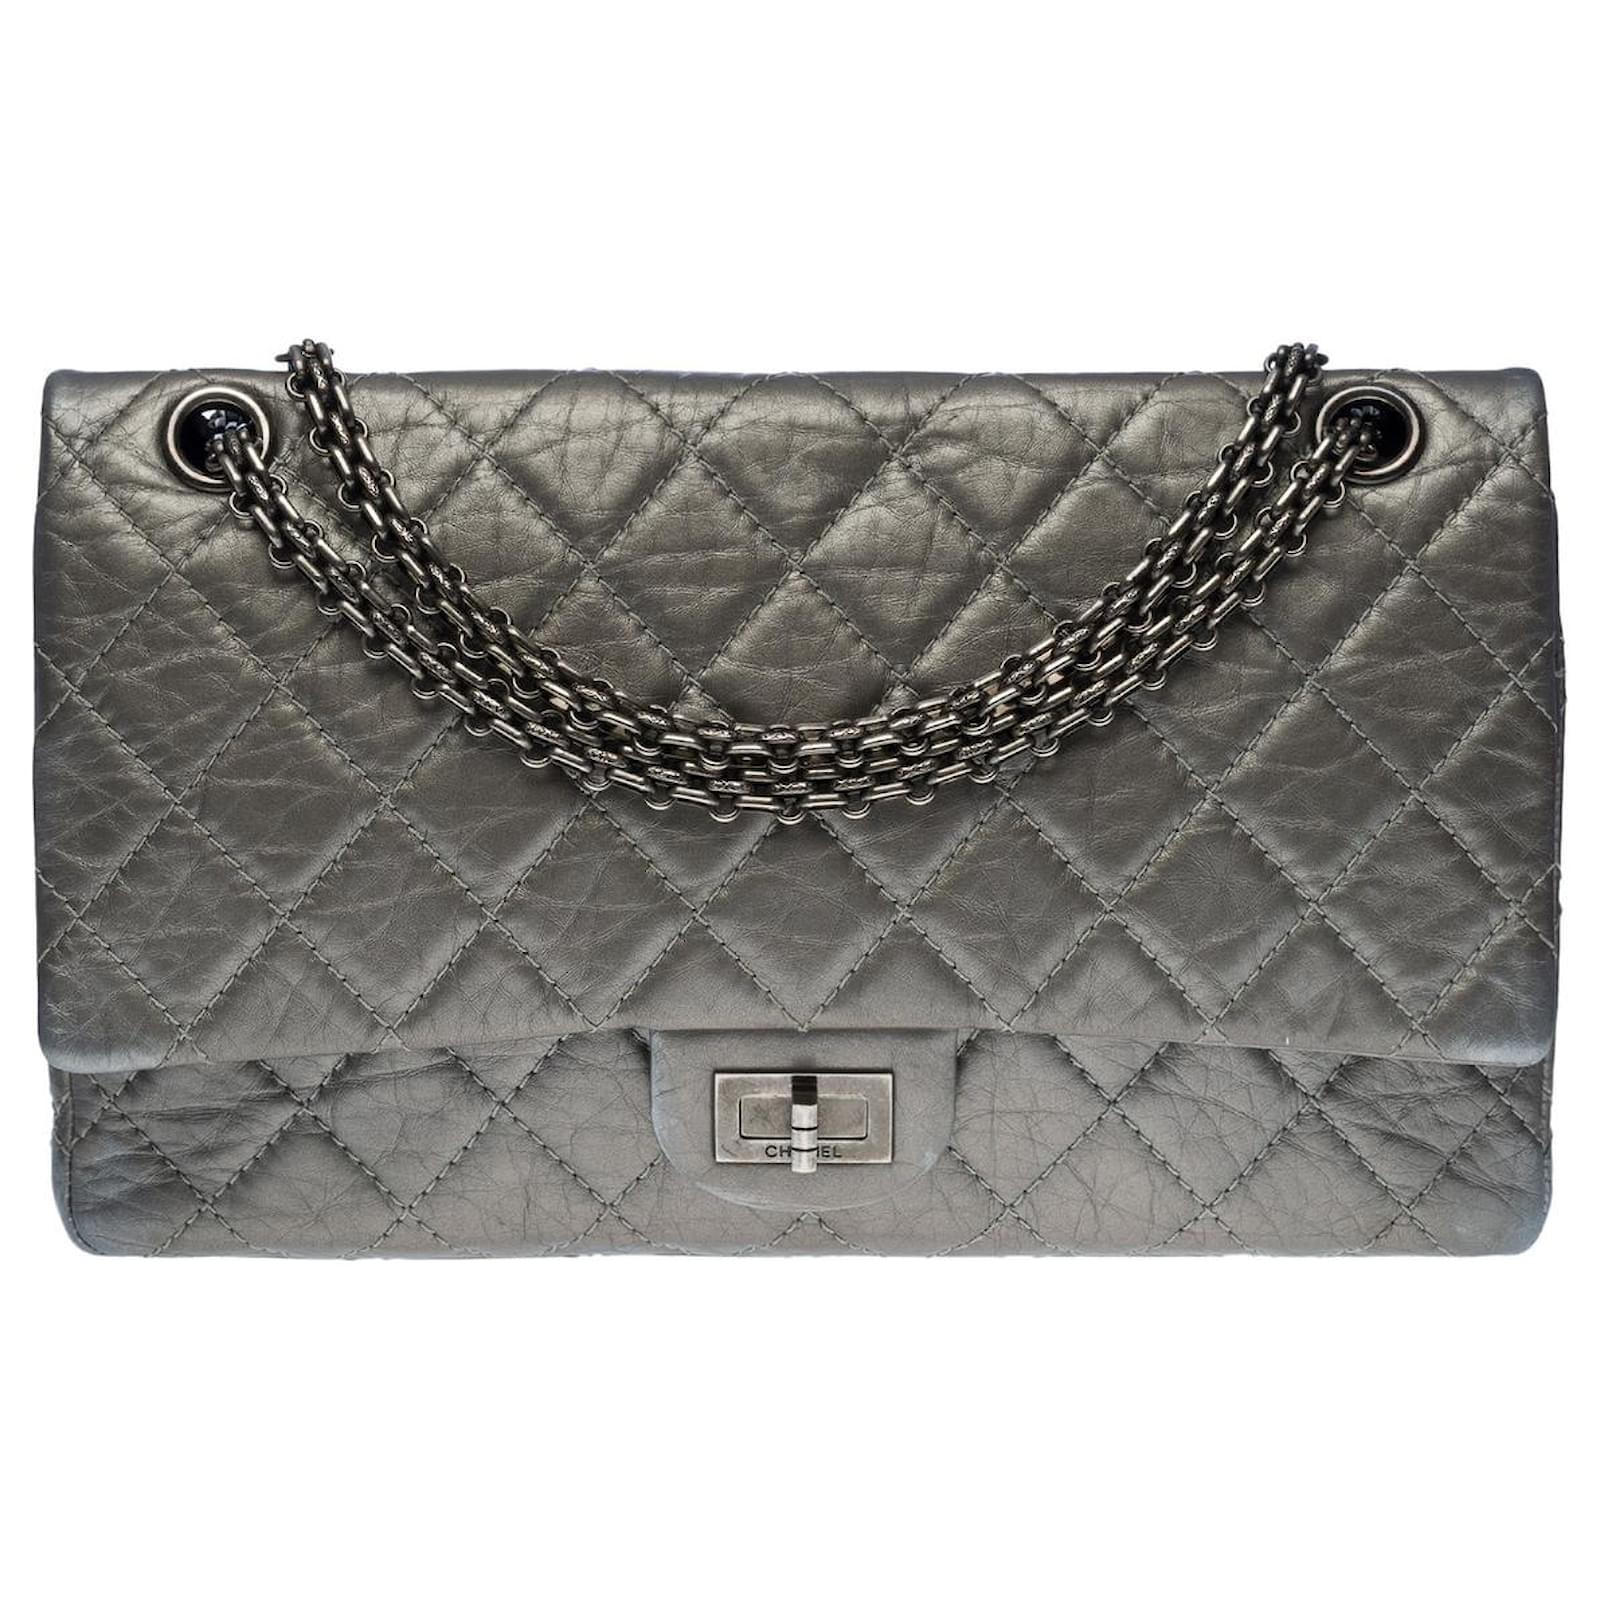 Totes Chanel Chanel Shoulder Sling Bag 2.55 Lined Flap in Metallic Silver Leather - 100656